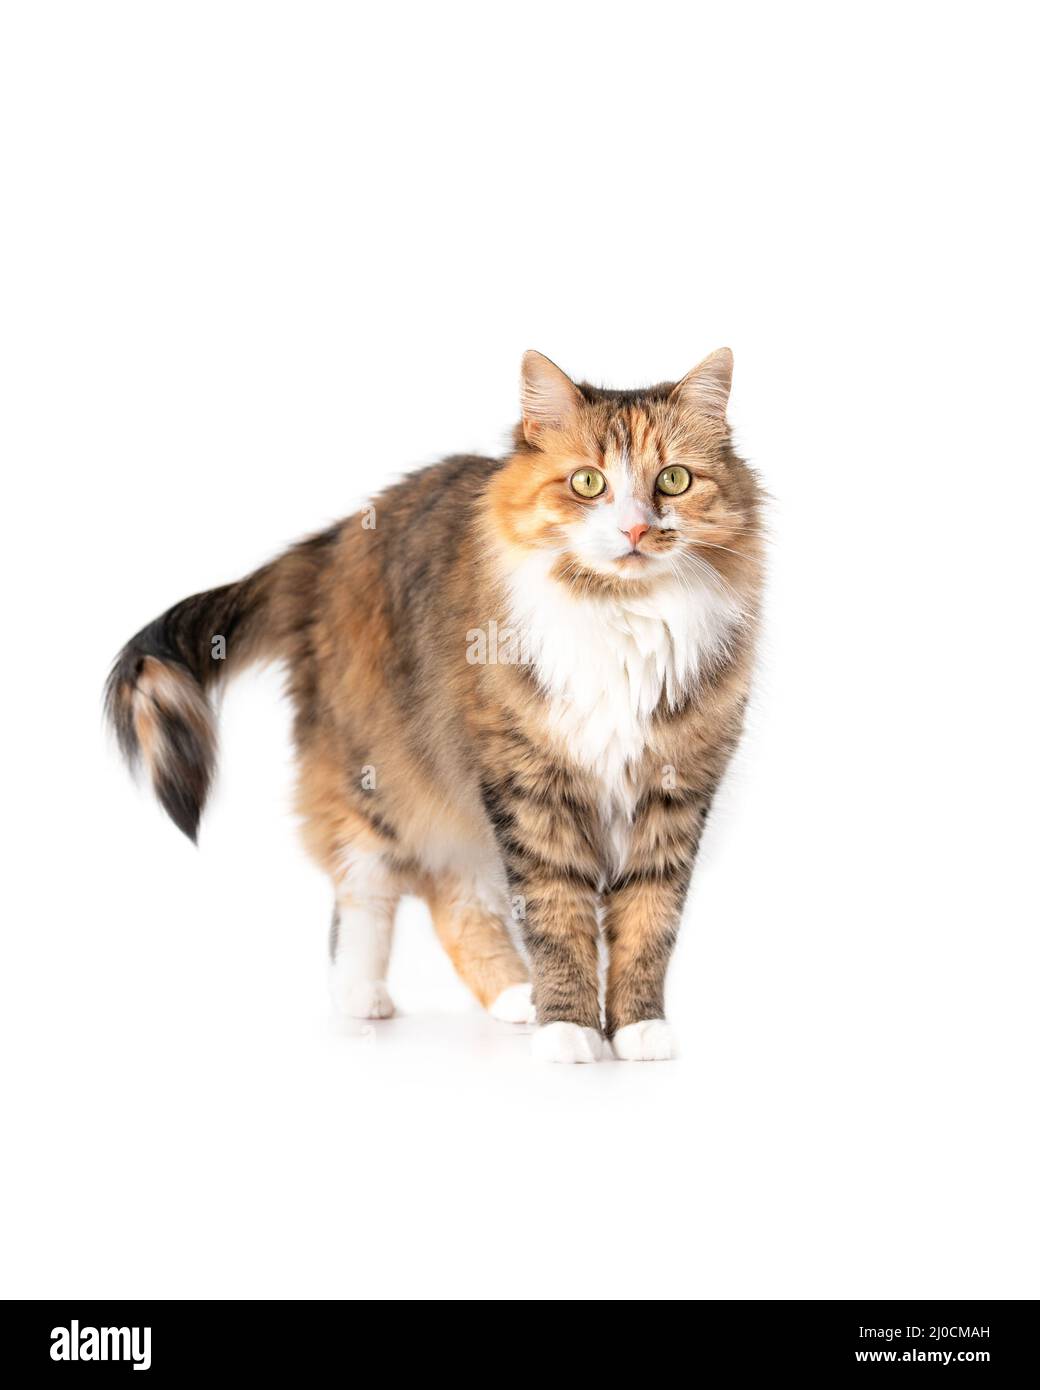 Fluffy cat standing while looking at camera. Front view of cat with curious body expression. Cute orange, white and black torbie kitty. Yellow eyes an Stock Photo